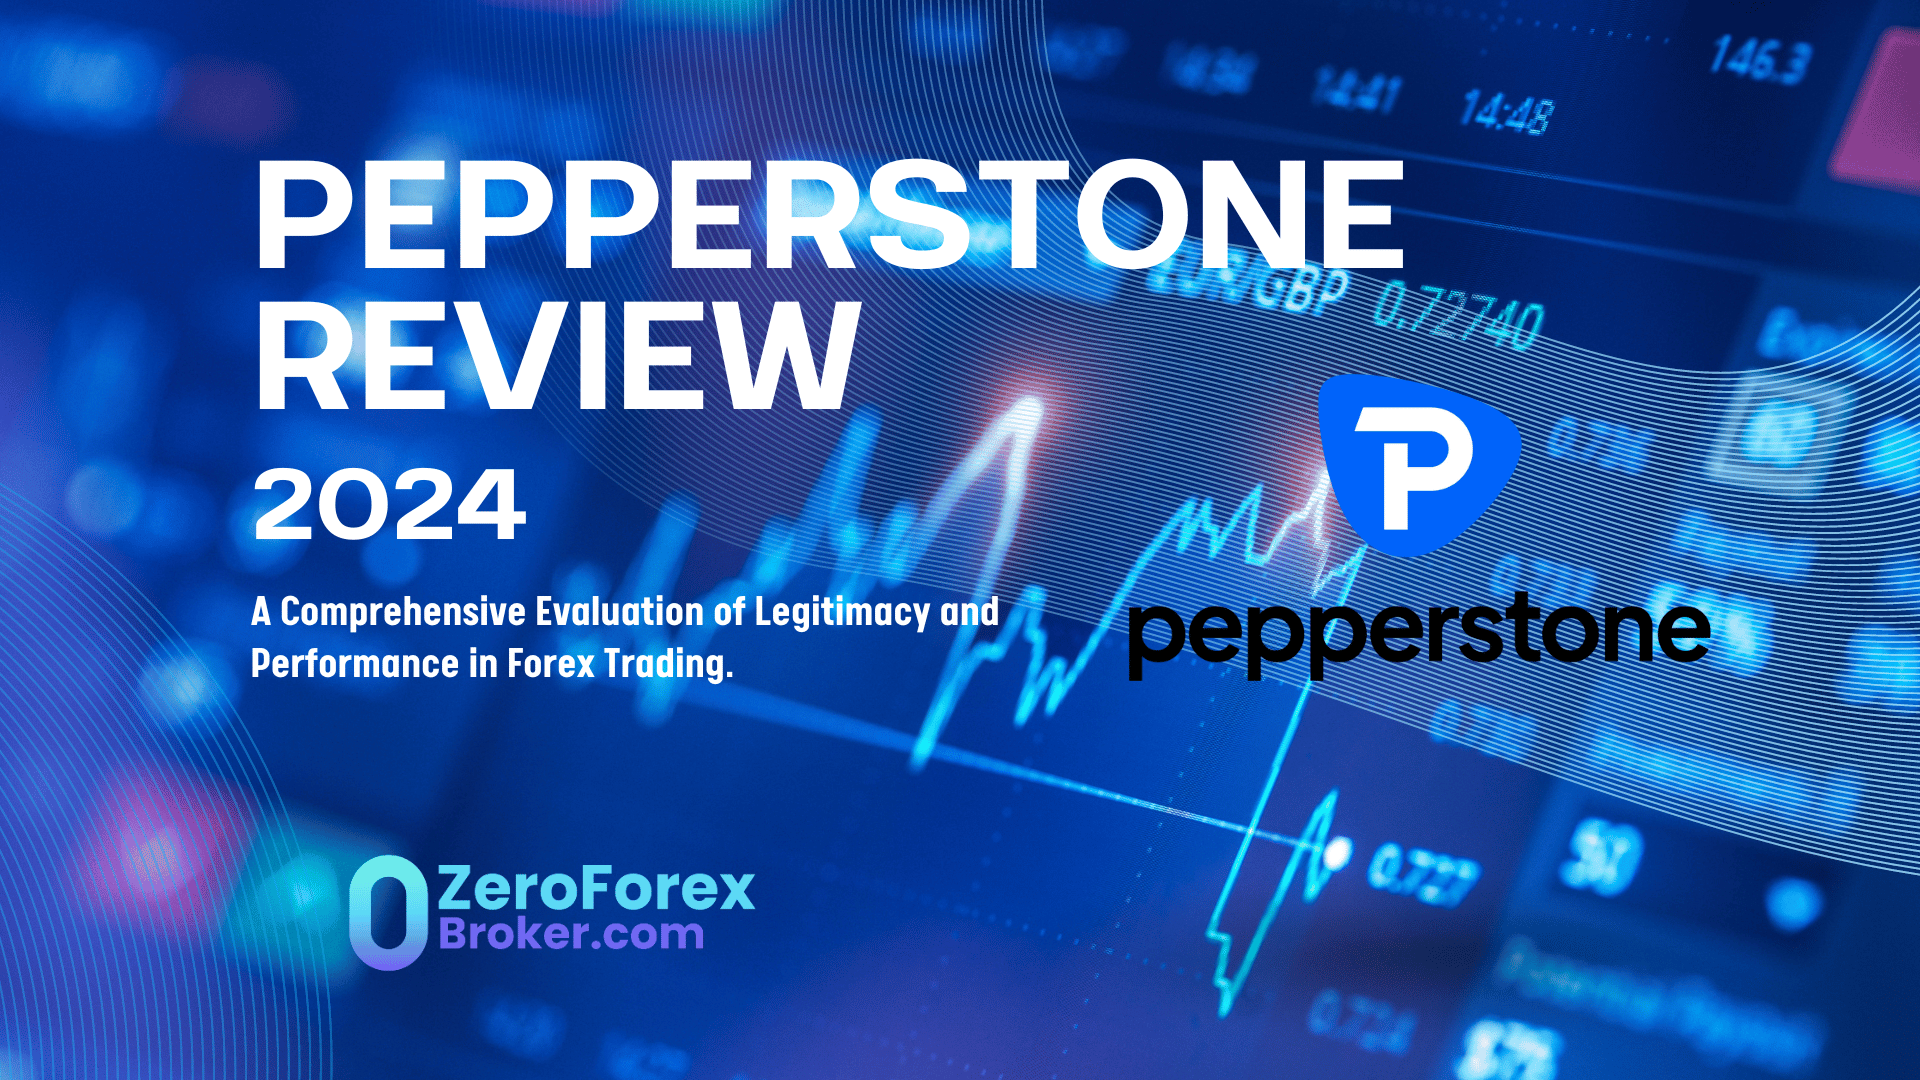 Pepperstone Review 2024: Comprehensive Analysis